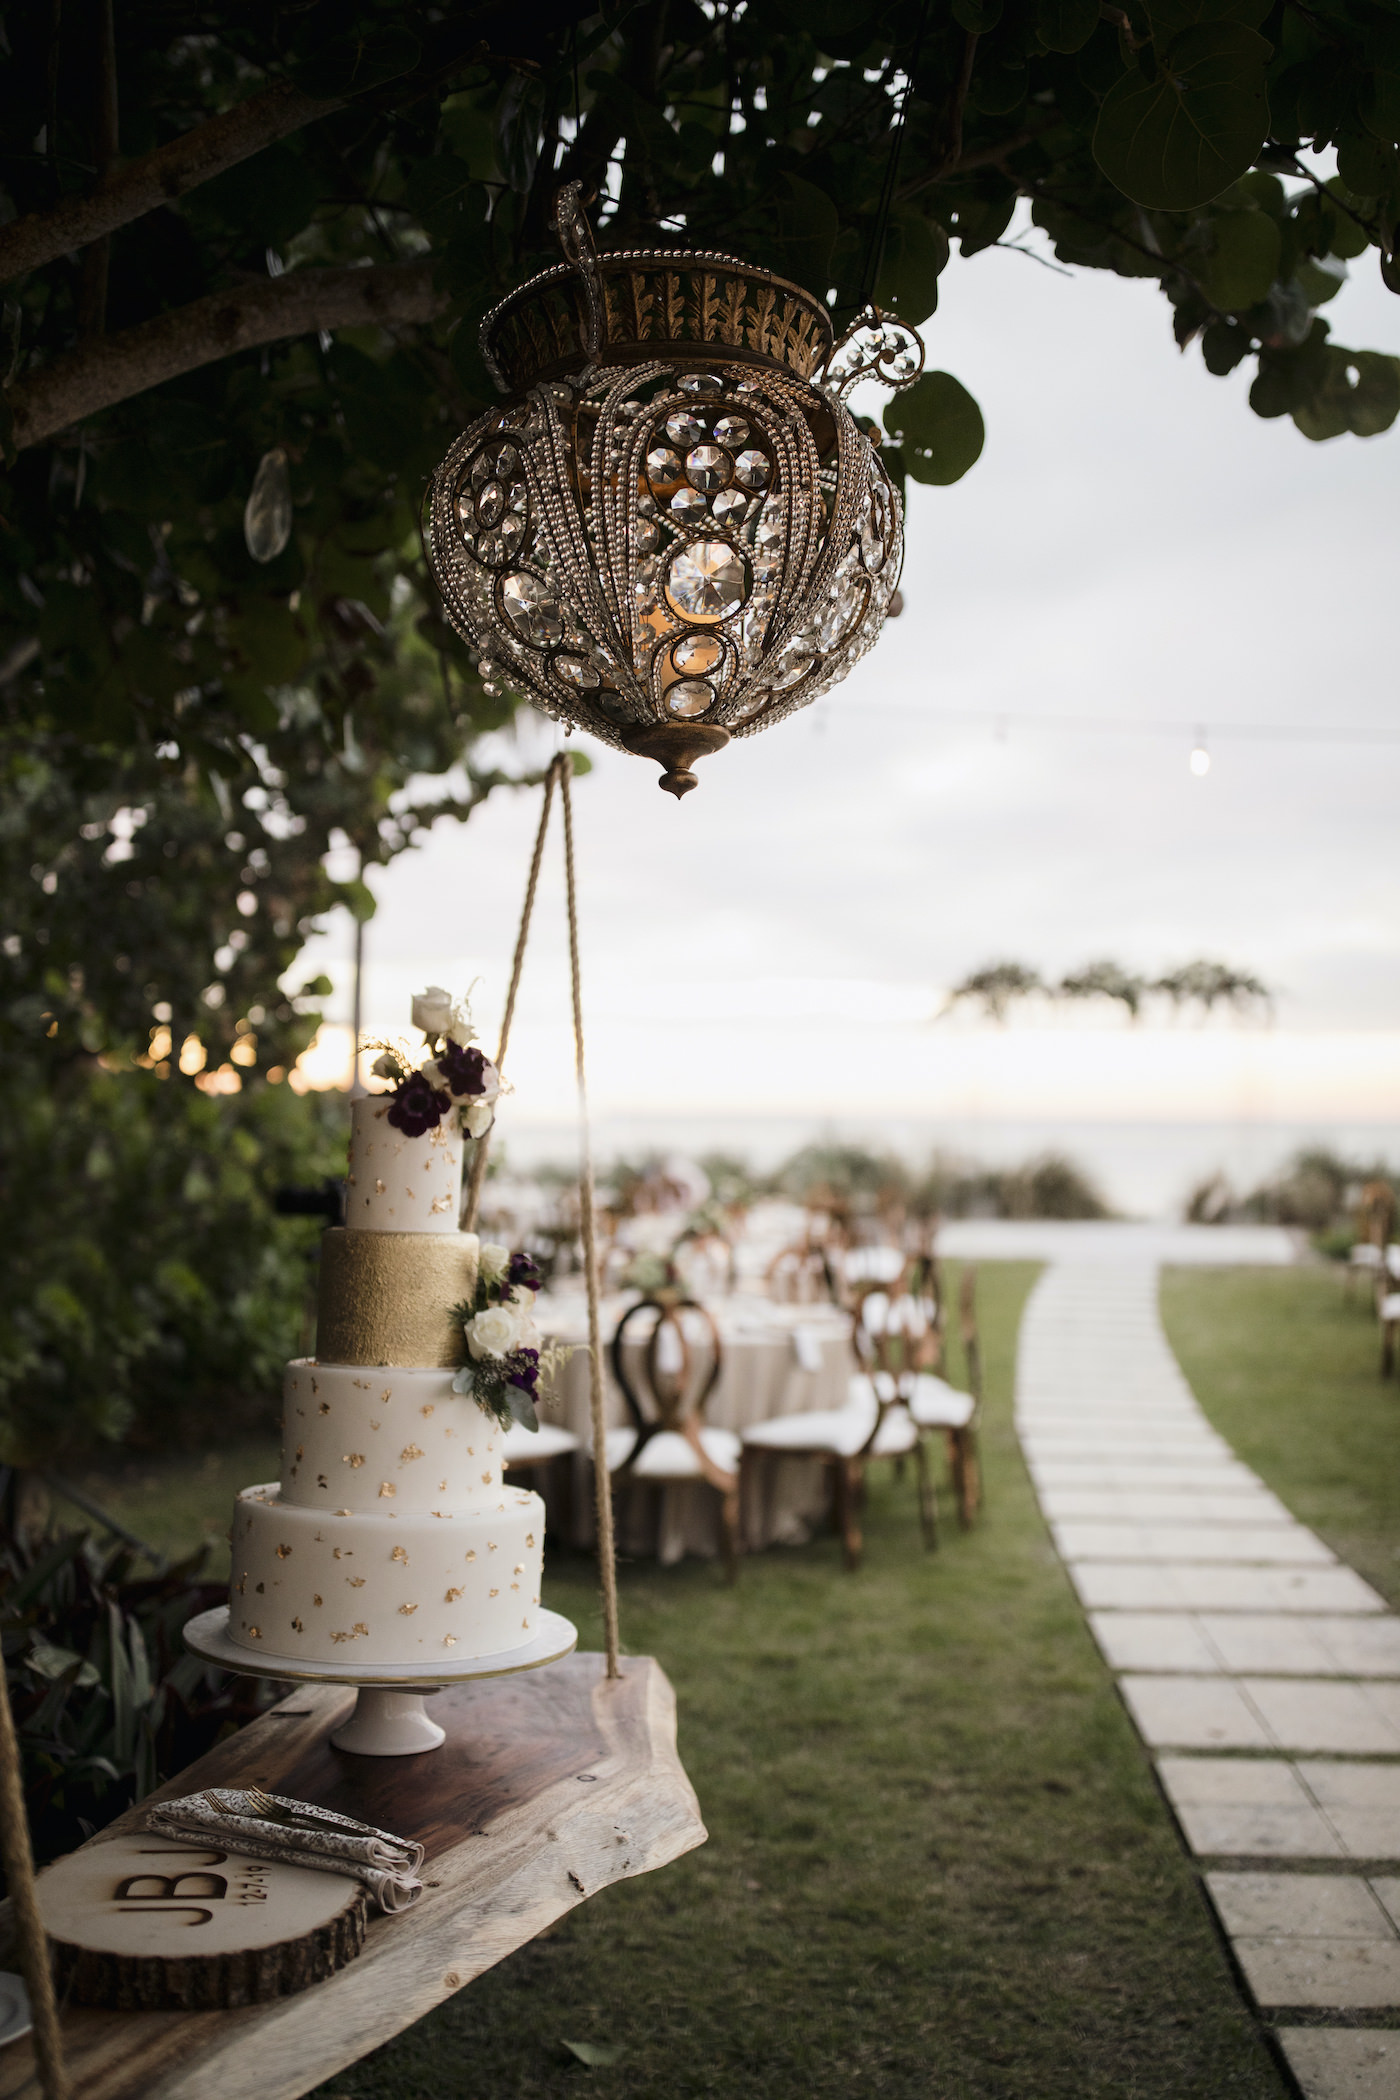 Suspended Floating Wedding Cake Display | Live Edge Wood Wedding Cake Table | Four Tier Ivory and Gold Fleck Wedding Cake with Fresh Flowers | Outdoor Sarasota Beach Wedding Reception